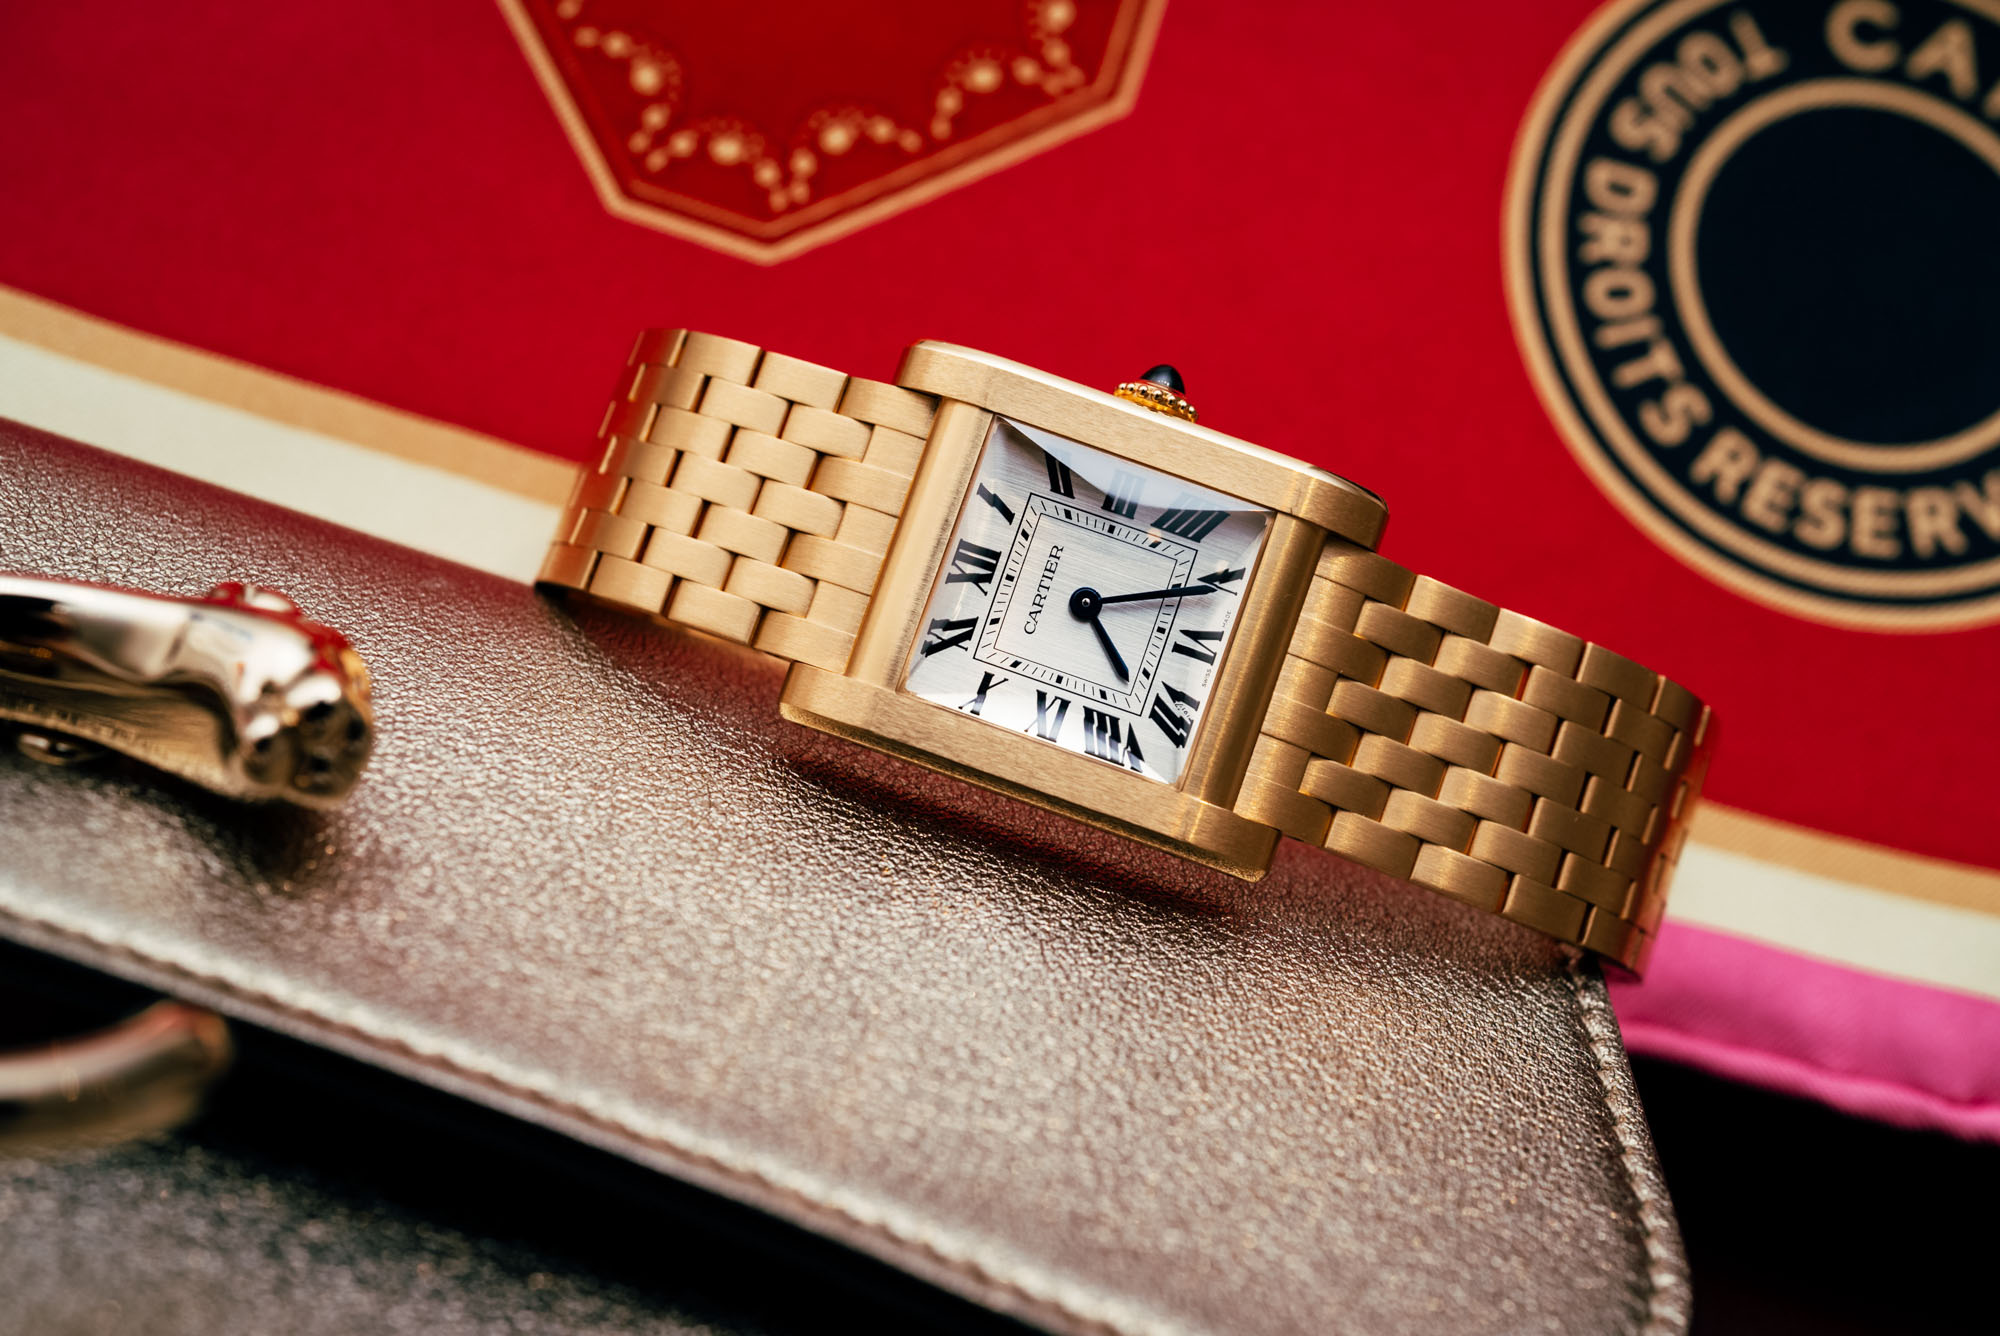 Cartier Tank Price: How Much Does a Cartier Tank Watch Cost?